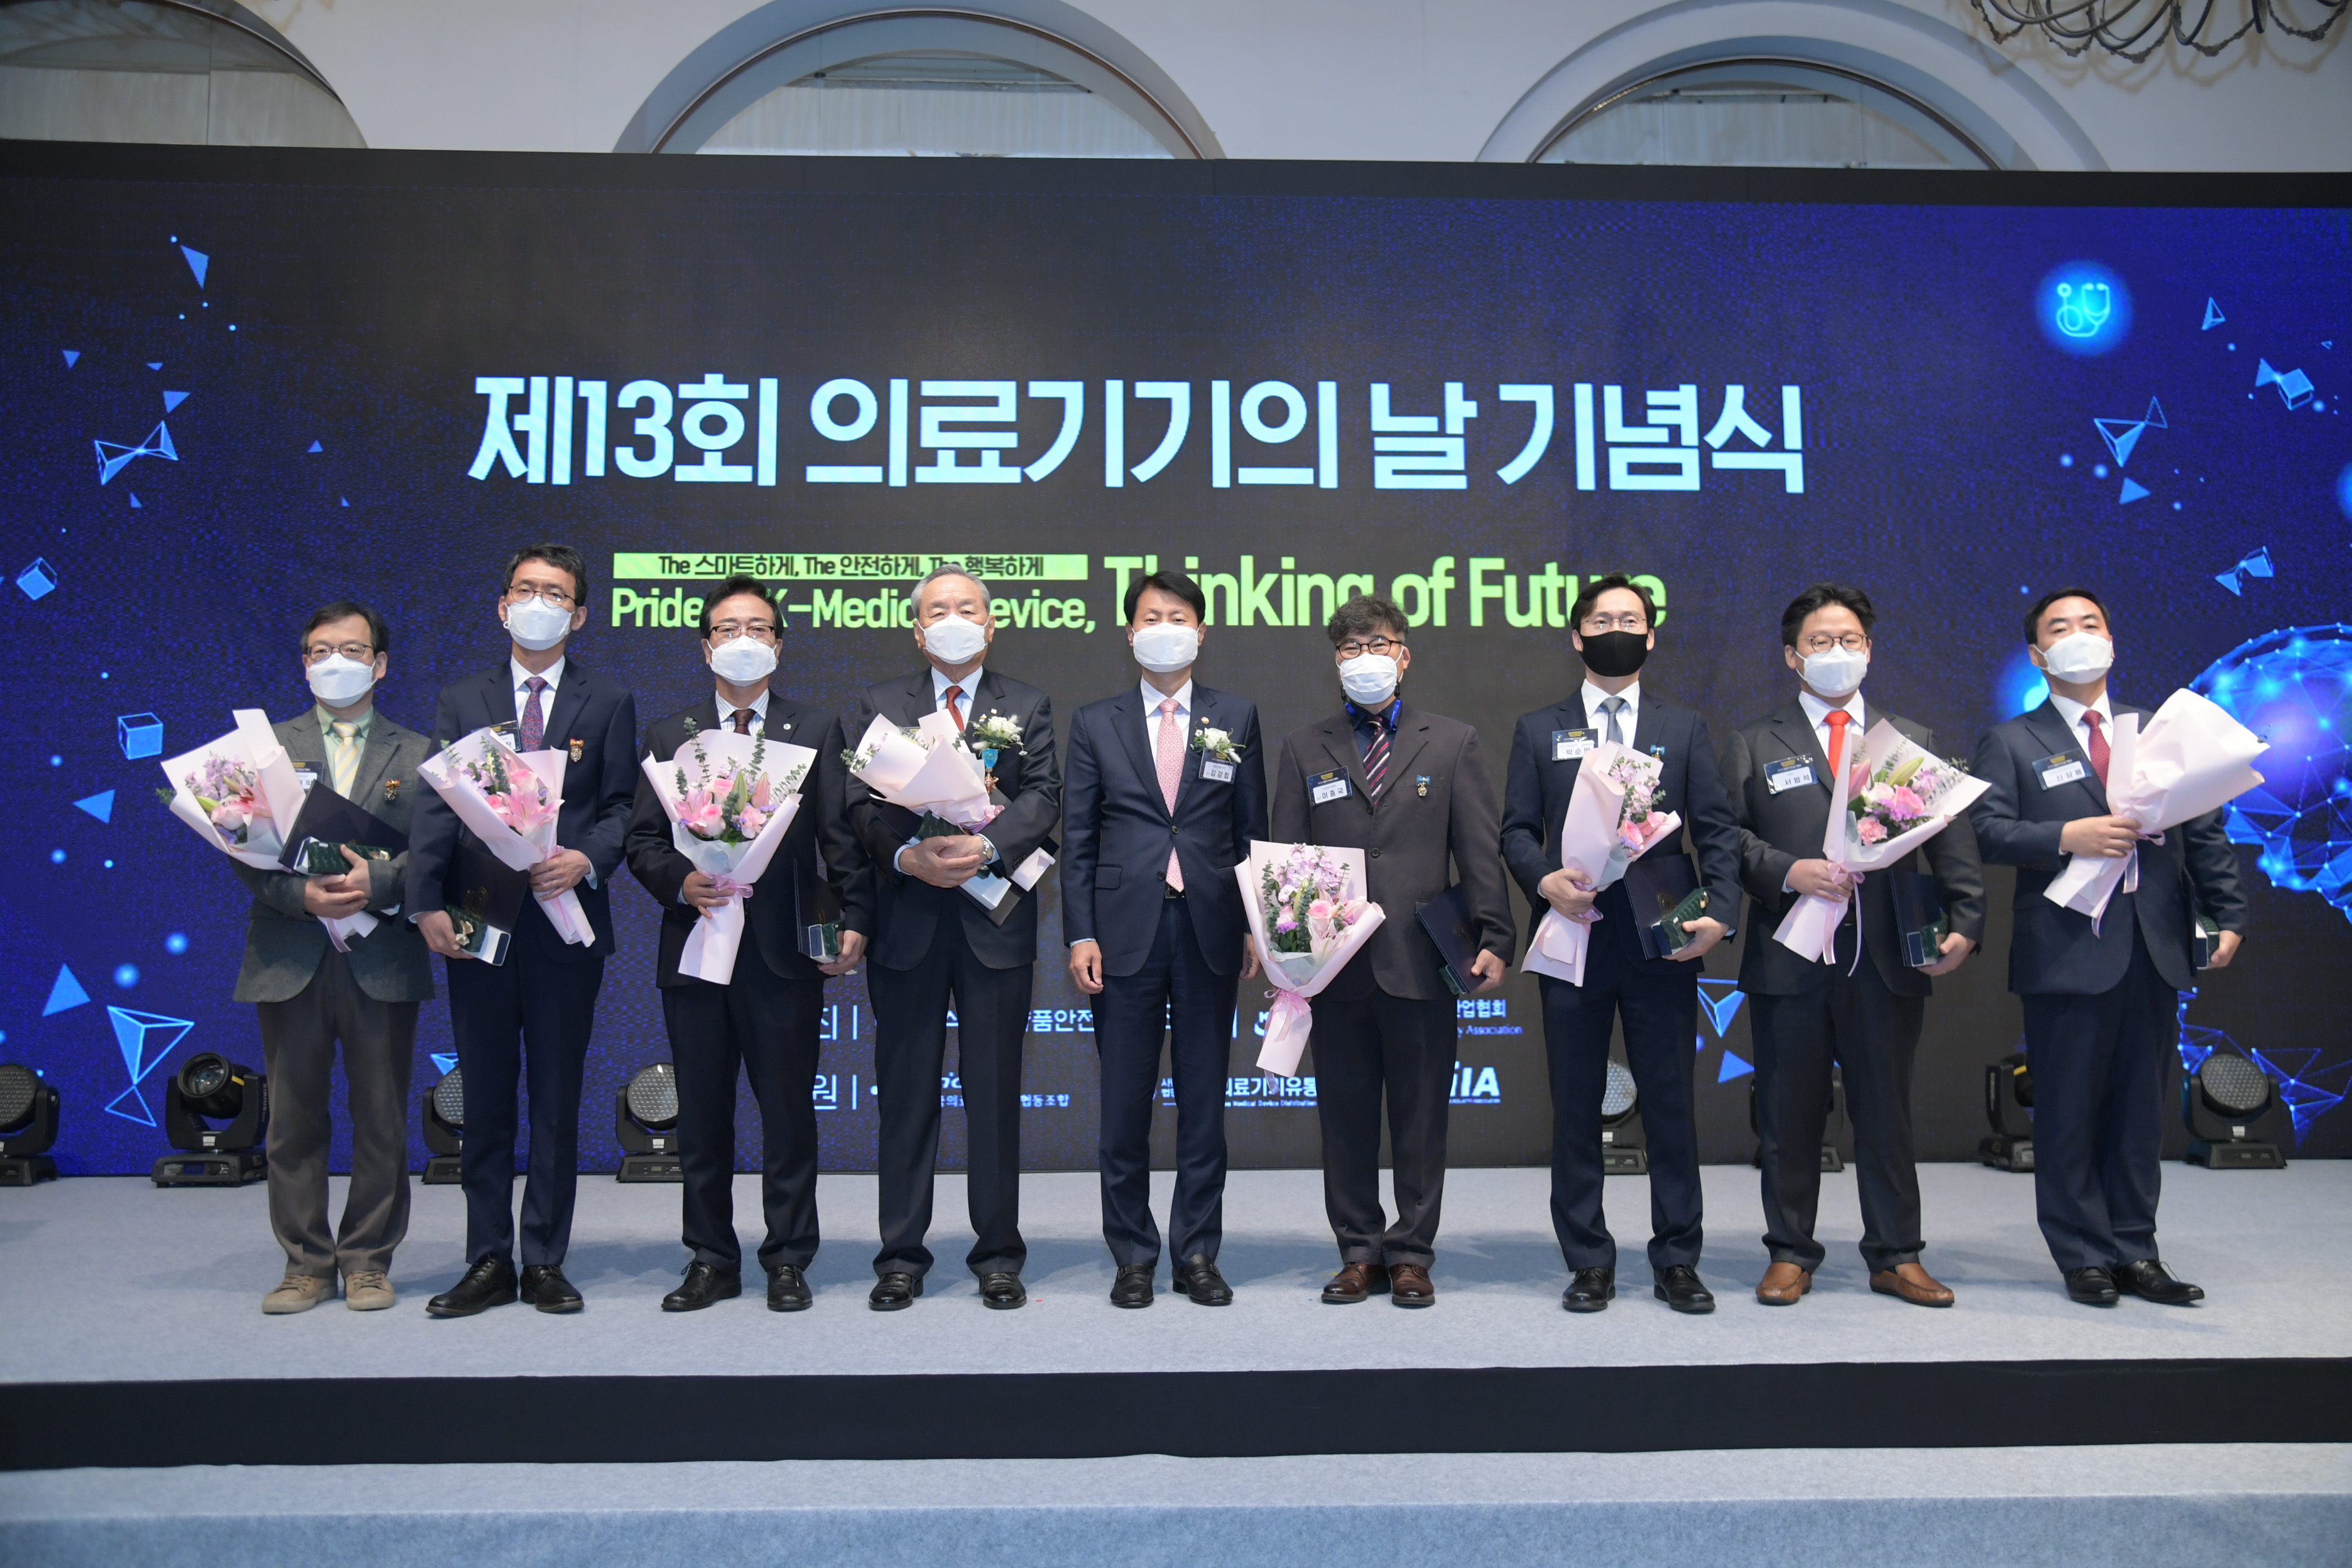 Photo News2 - [Nov. 20, 2020] A Commemorative Ceremony of the 13th Day of Medical Device